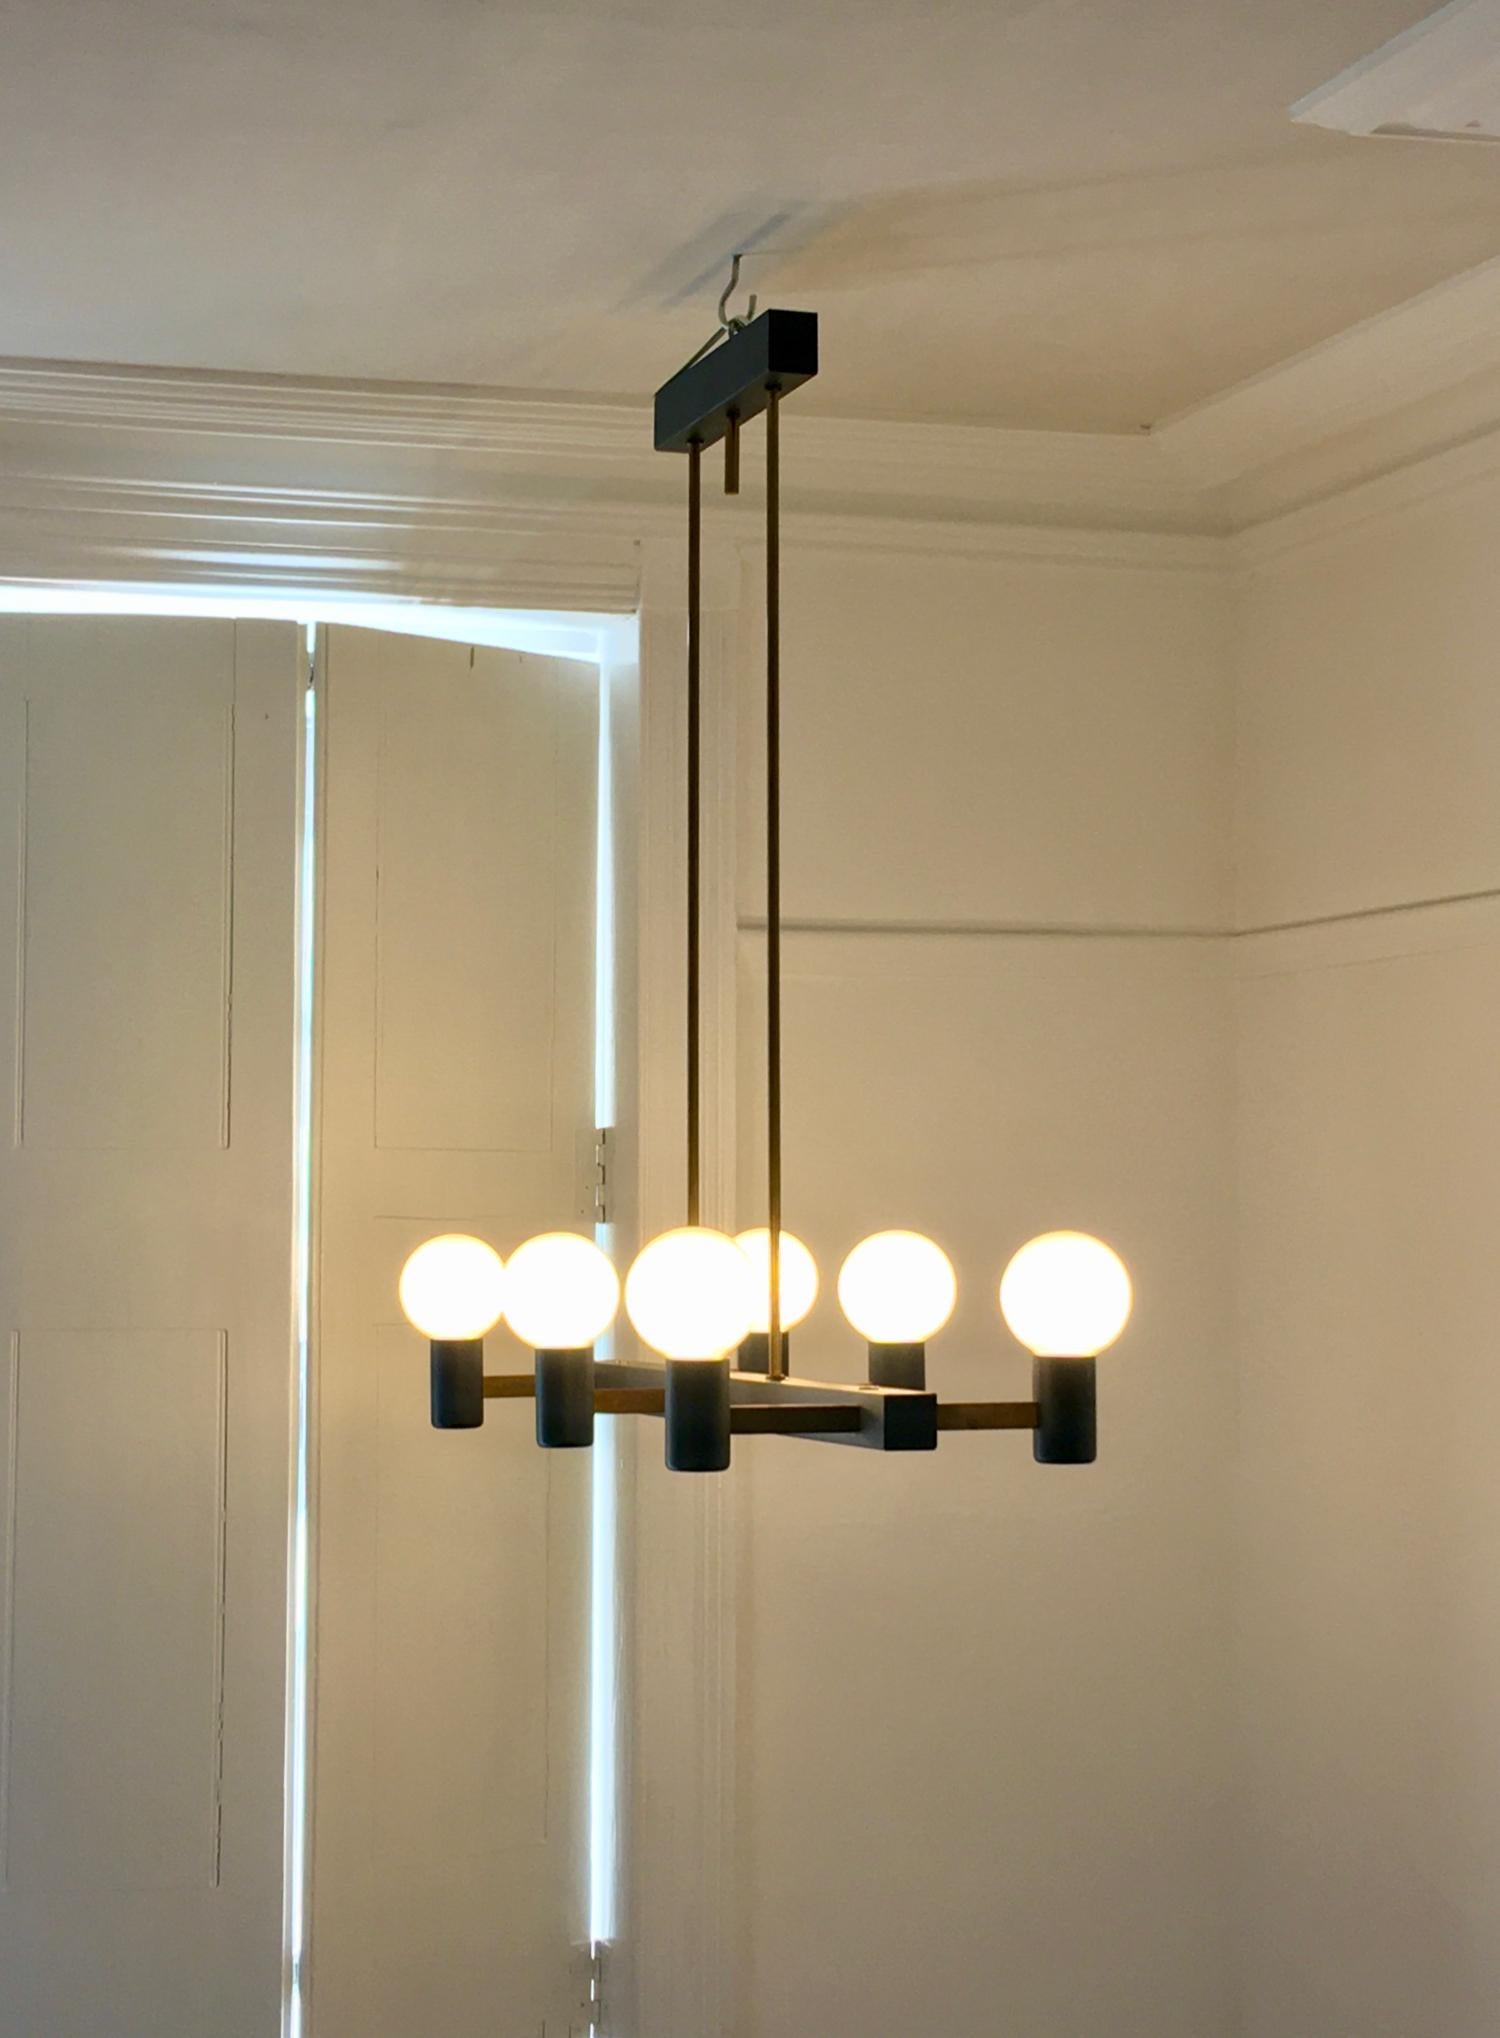 Steel and brass chandelier with minimal architectural lines. Mid-20th century, Netherlands. A simple piece of modern design, nicely made, consisting of six lamp-holders in a grey steel frame with brass cross-bars; the style and overall silhouette